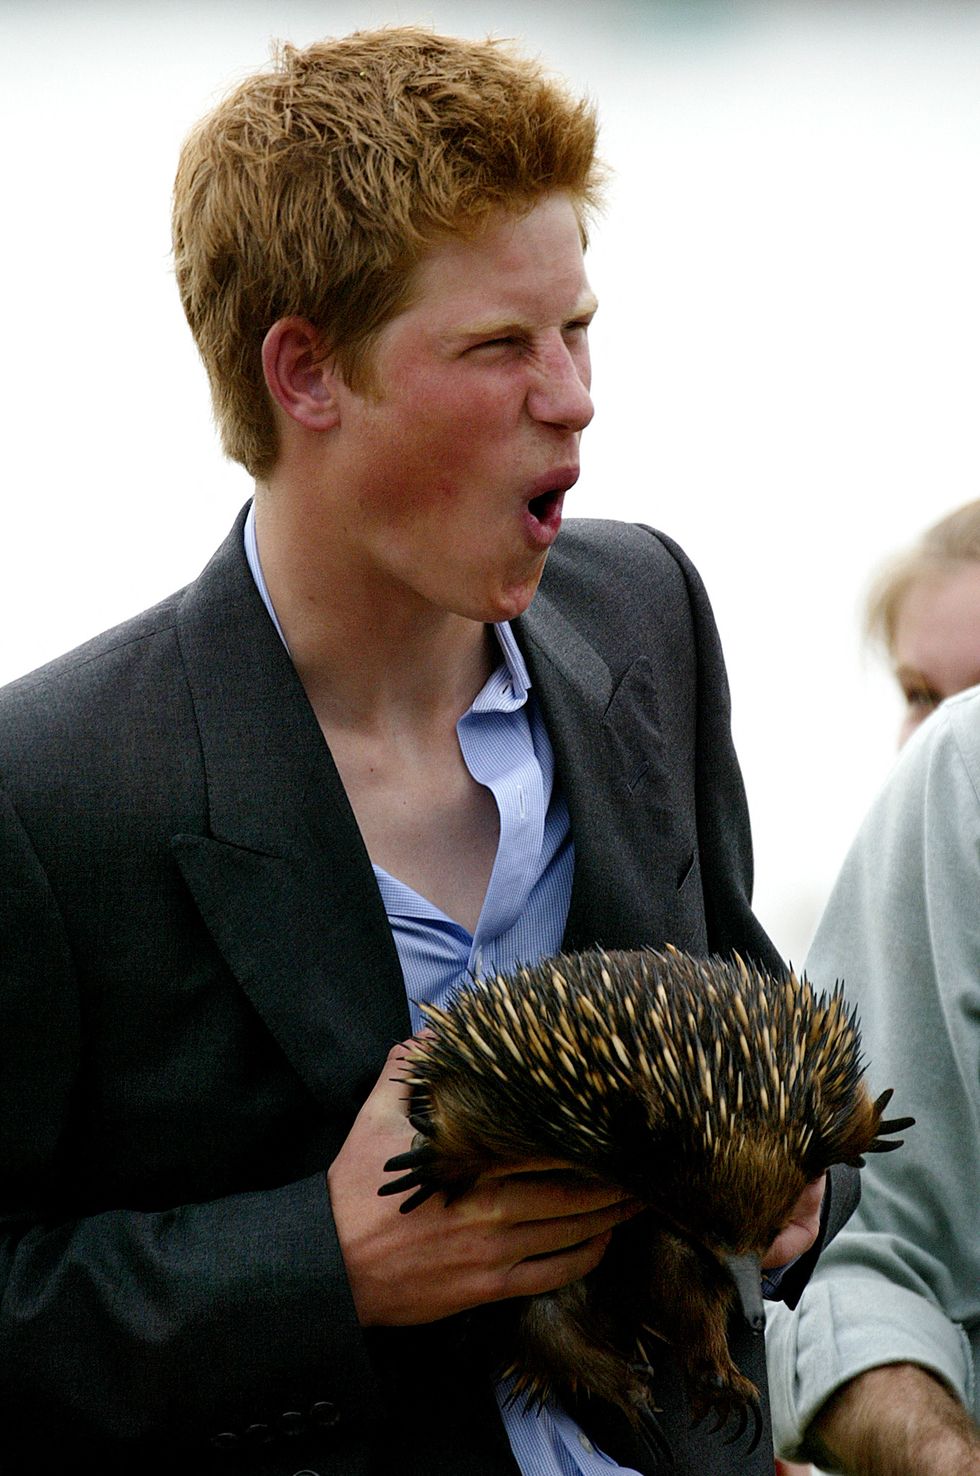 topshot prince harry reacts as he holds spike the echidna, at sydneys taronga zoo, 23 september 2003 harry, prince charles second son and third in line to the british throne, arrived in australia 23 september for a three month stay during his gap year before military college, planning to work during his trip as a jackaroo at cattle and sheep stations afp photogreg wood photo by greg wood afp photo by greg woodafp via getty images